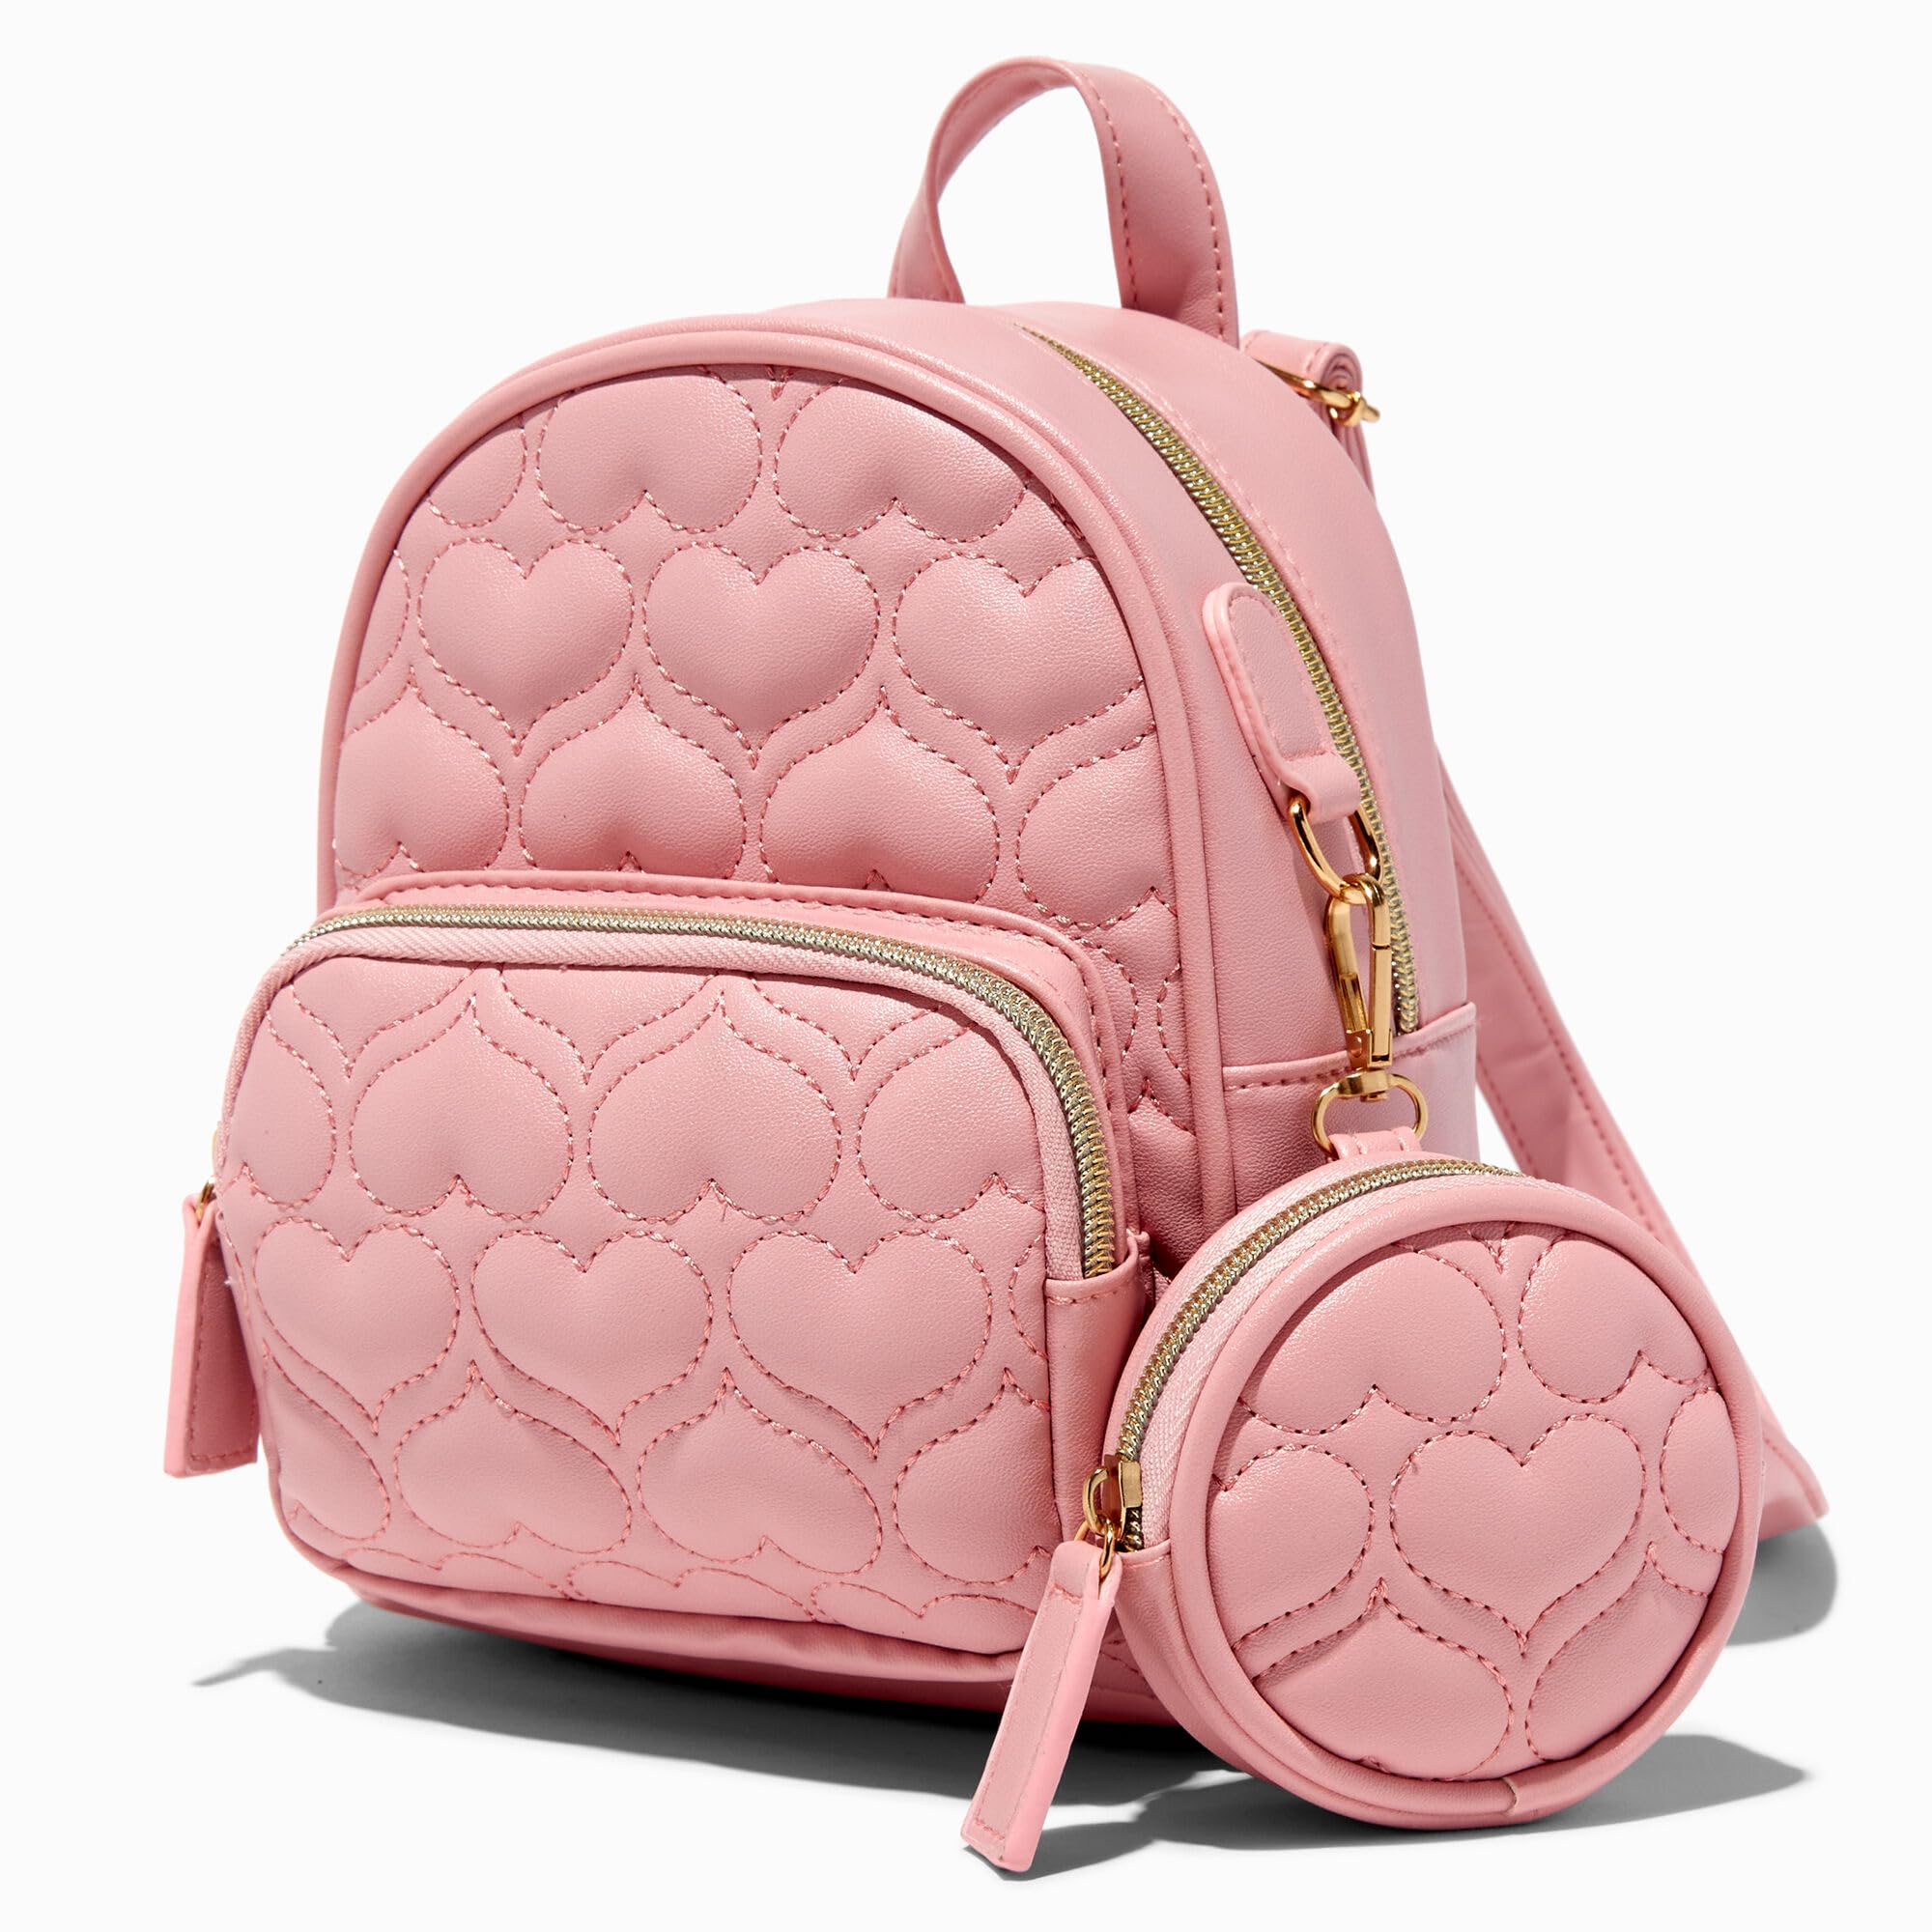 Claire's Pink Mini Quilted Backpack with Matching Coin Purse – Cute One Size Girls Backpack Book Bag - Great For Sports, Traveling, and Hiking